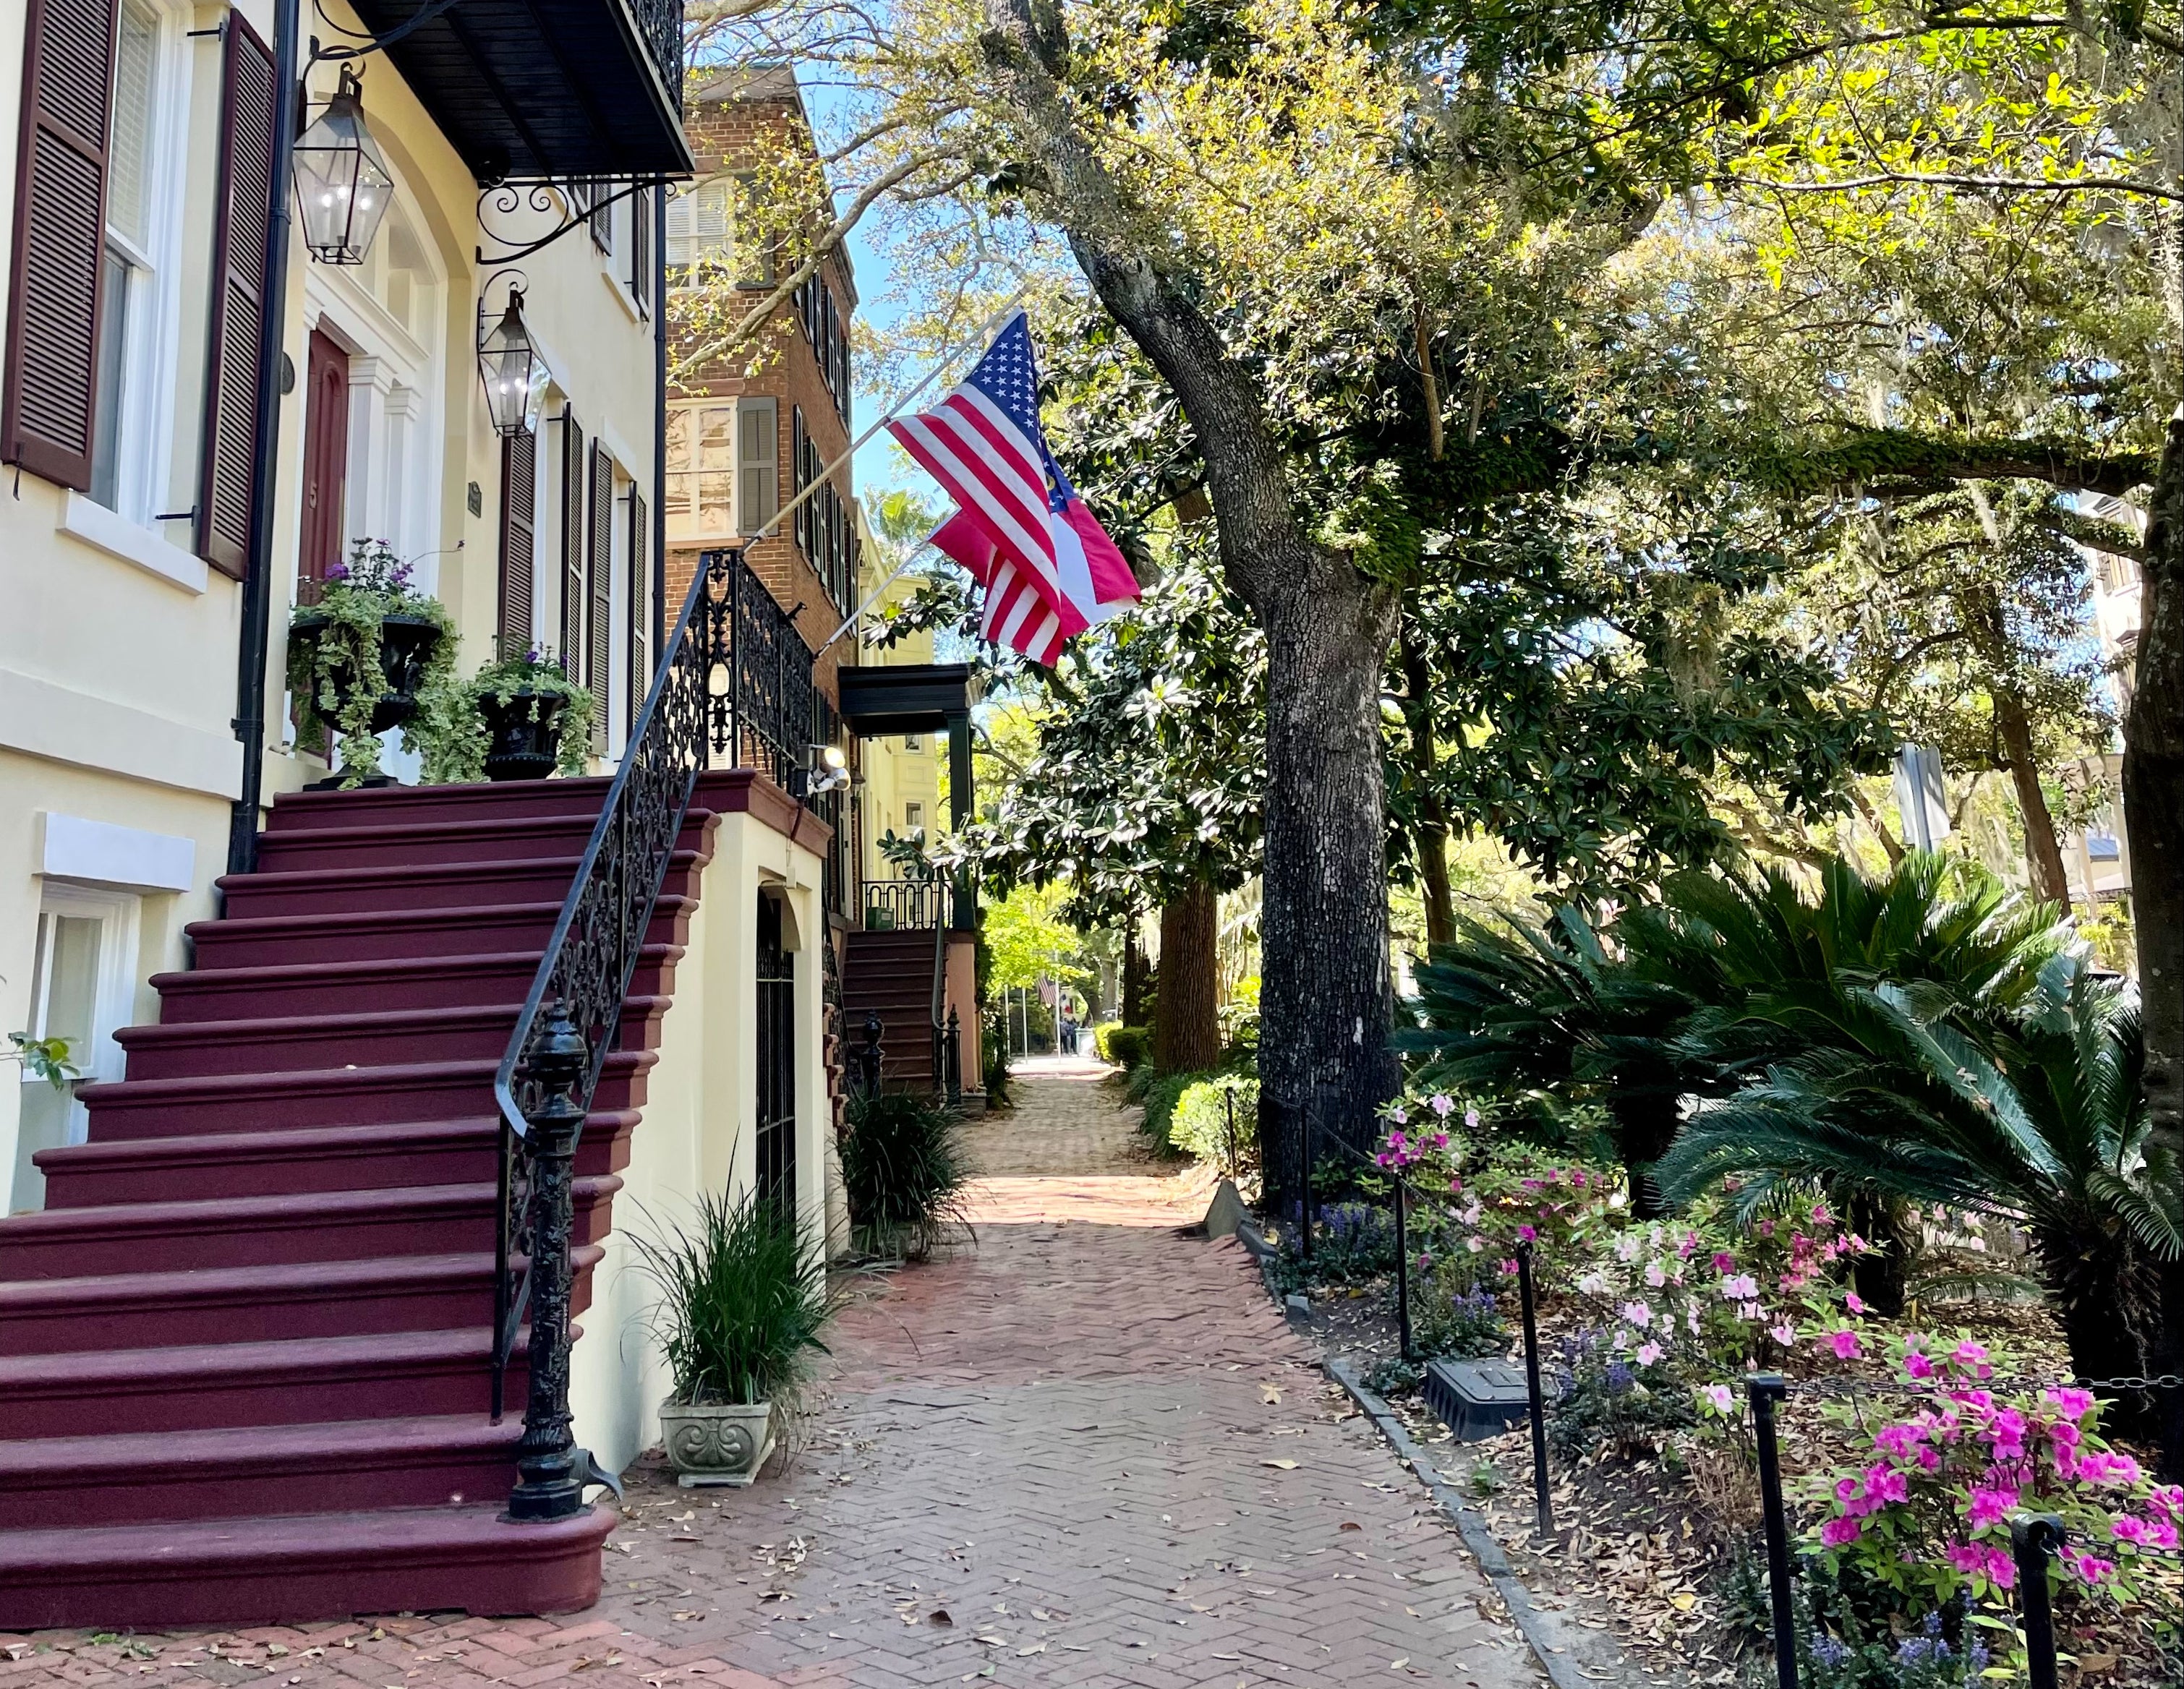 Stop off in Savannah for sunshine, history and some really great brunches